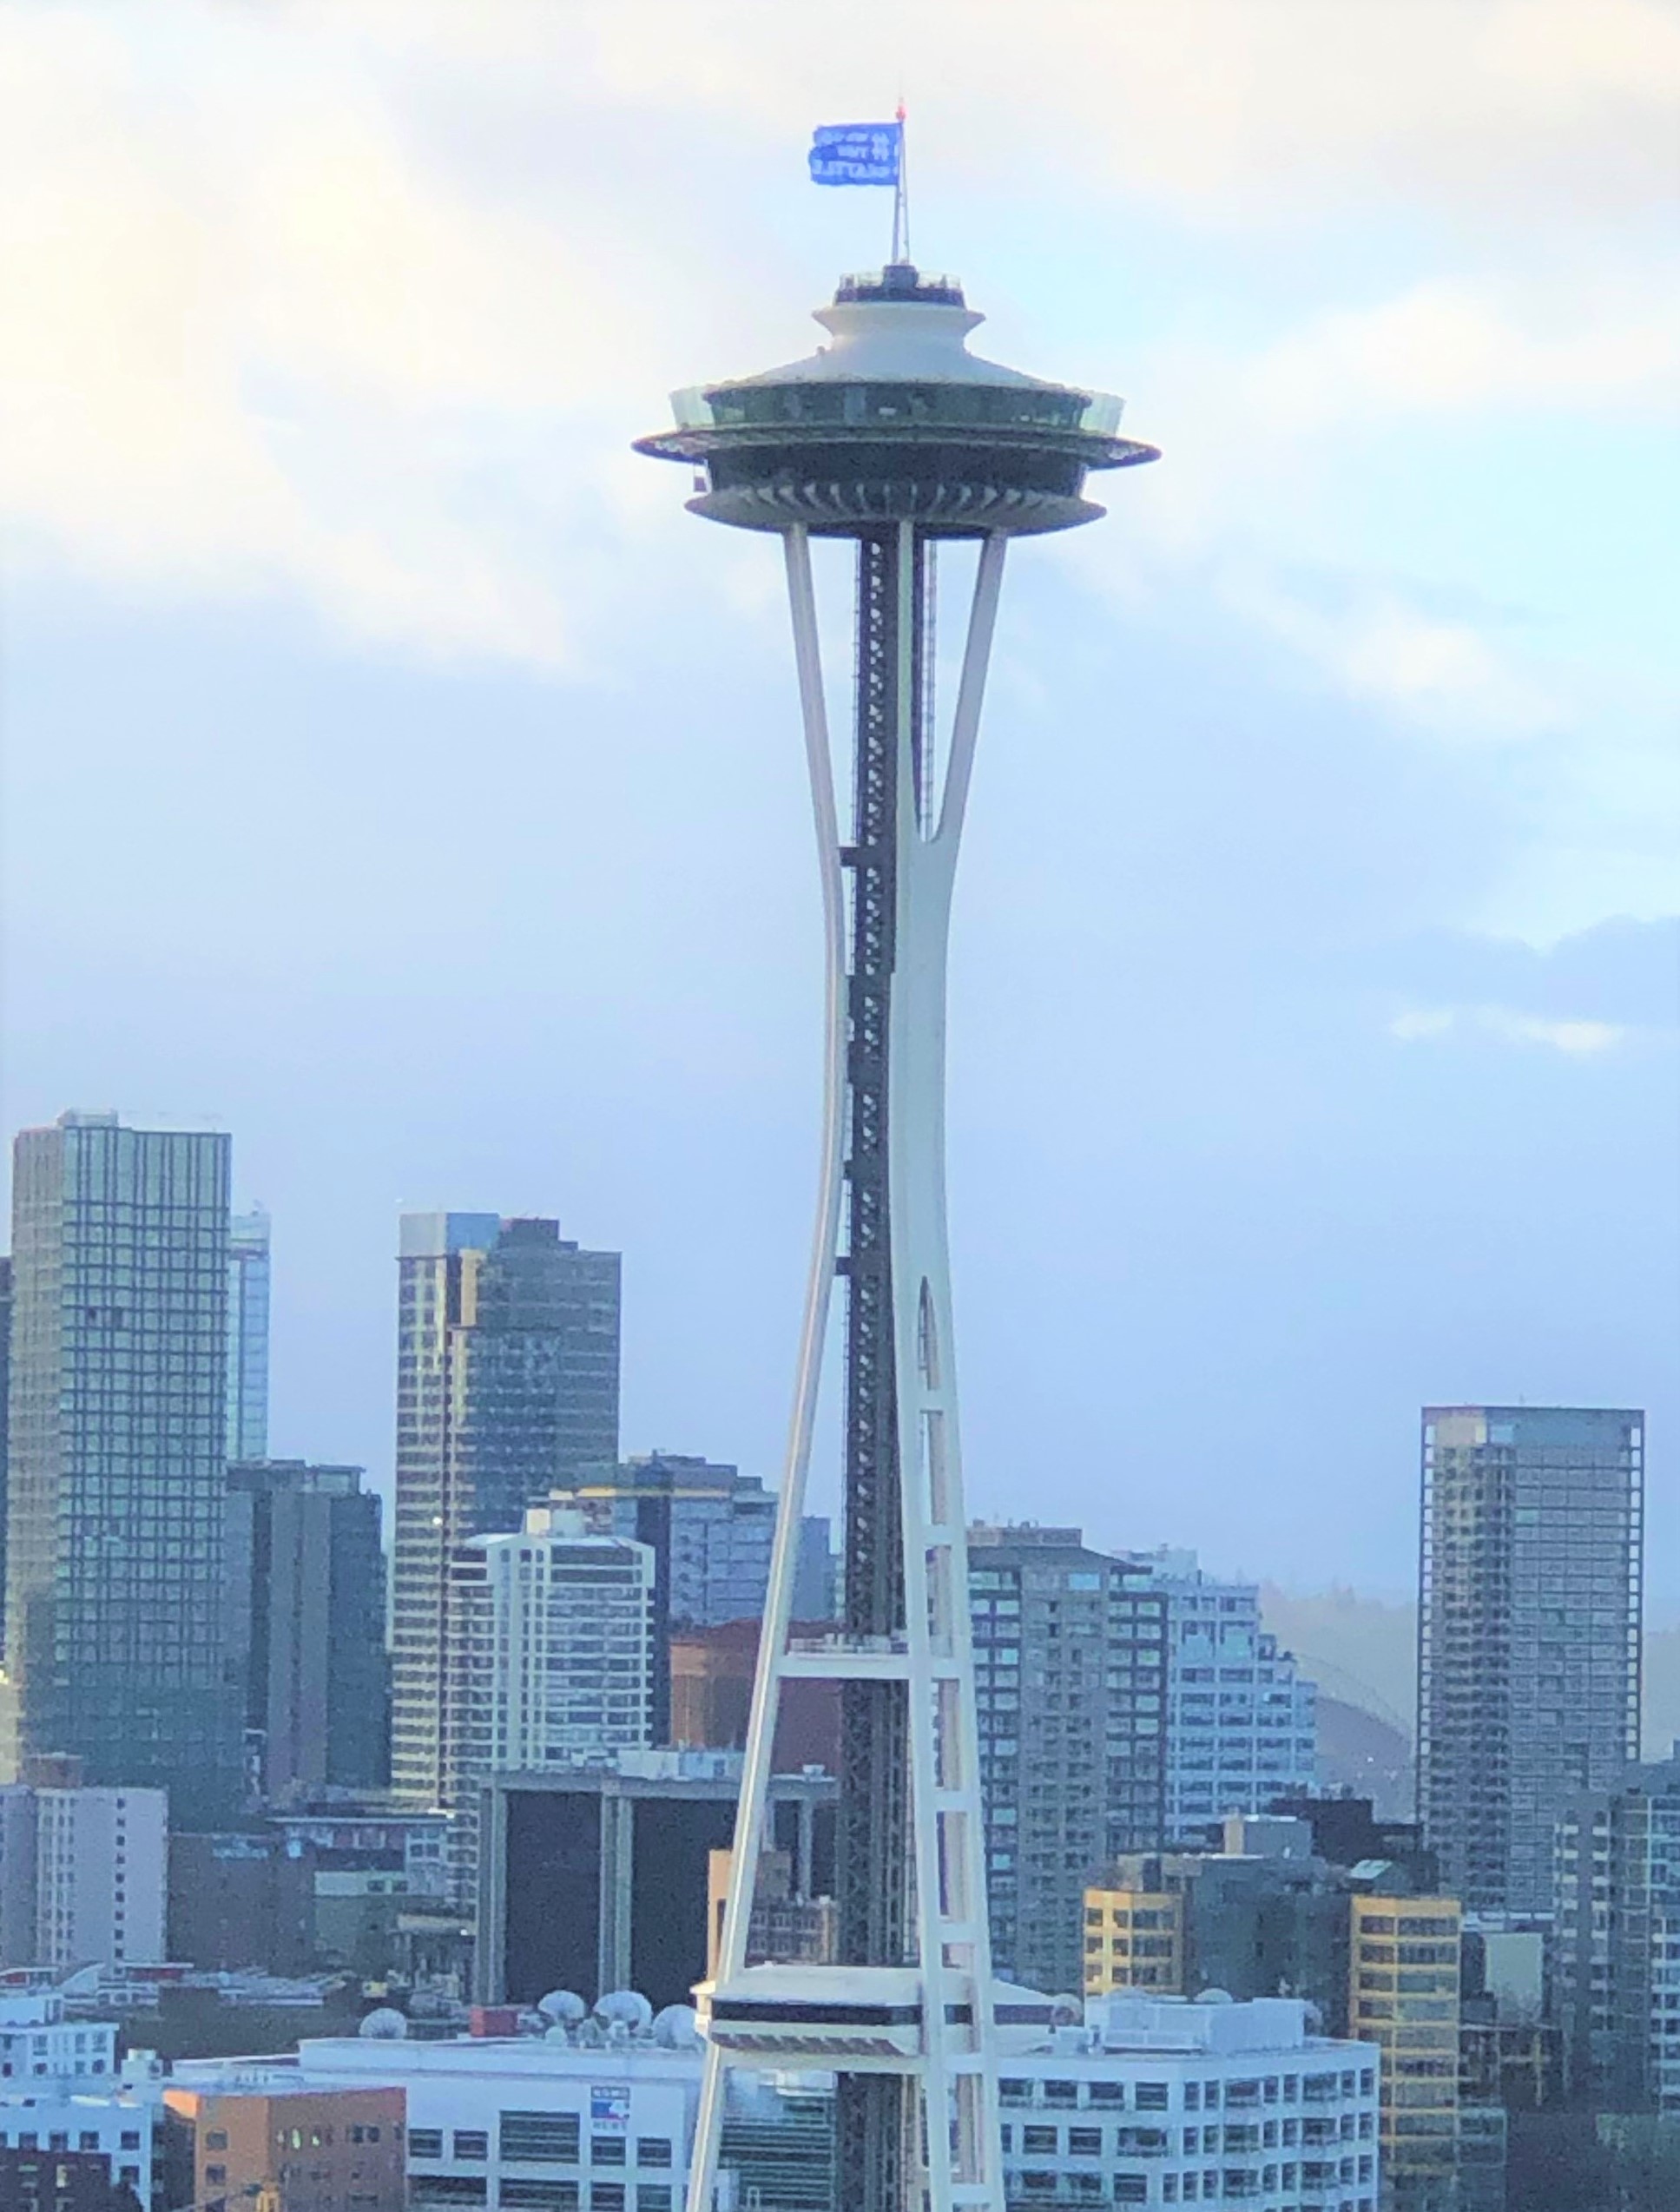 The Space Needle in Seattle, WA